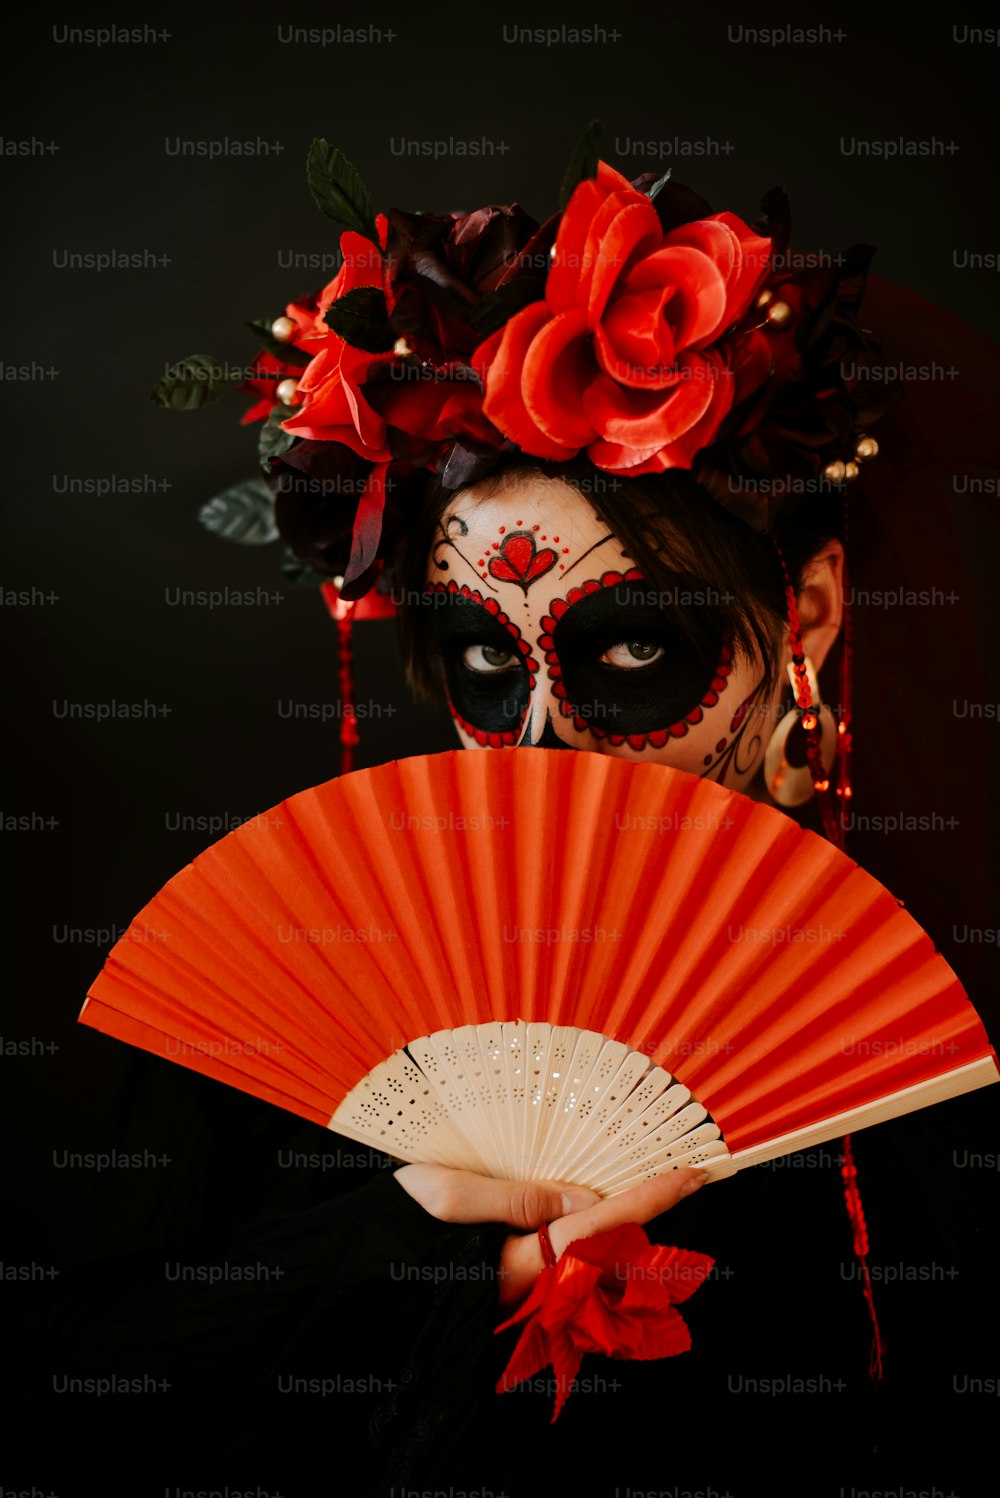 a woman with makeup and makeup art holding a fan